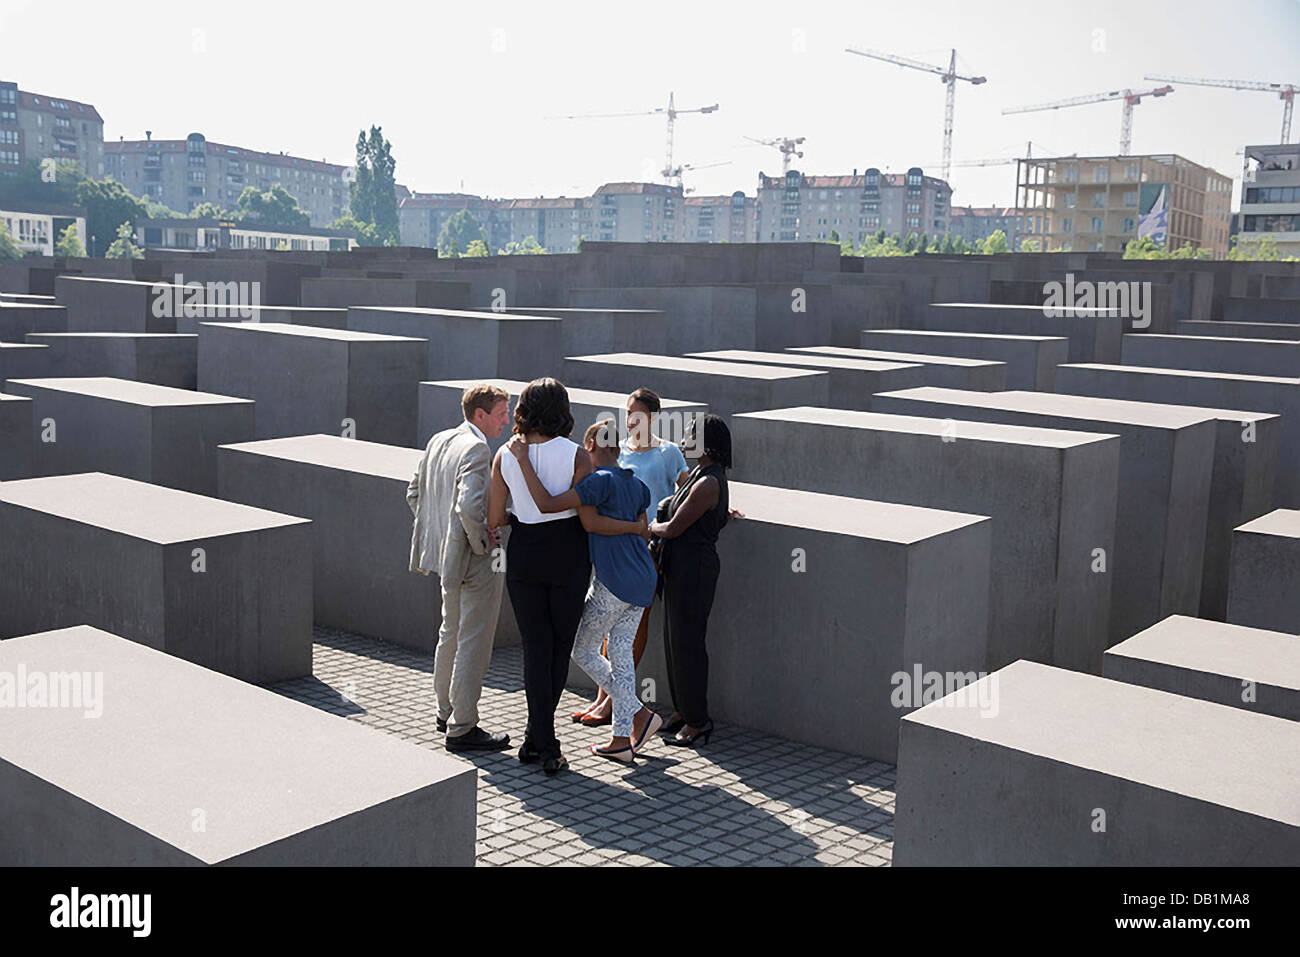 US First Lady Michelle Obama, along with daughters Sasha and Malia, listens to Foundation Director Uwe Neumarker during their visit to the Memorial to the Murdered Jews of Europe June 19, 2013 in Berlin, Germany. Sister-in-law Auma Obama, right, accompanies them during the tour. Stock Photo